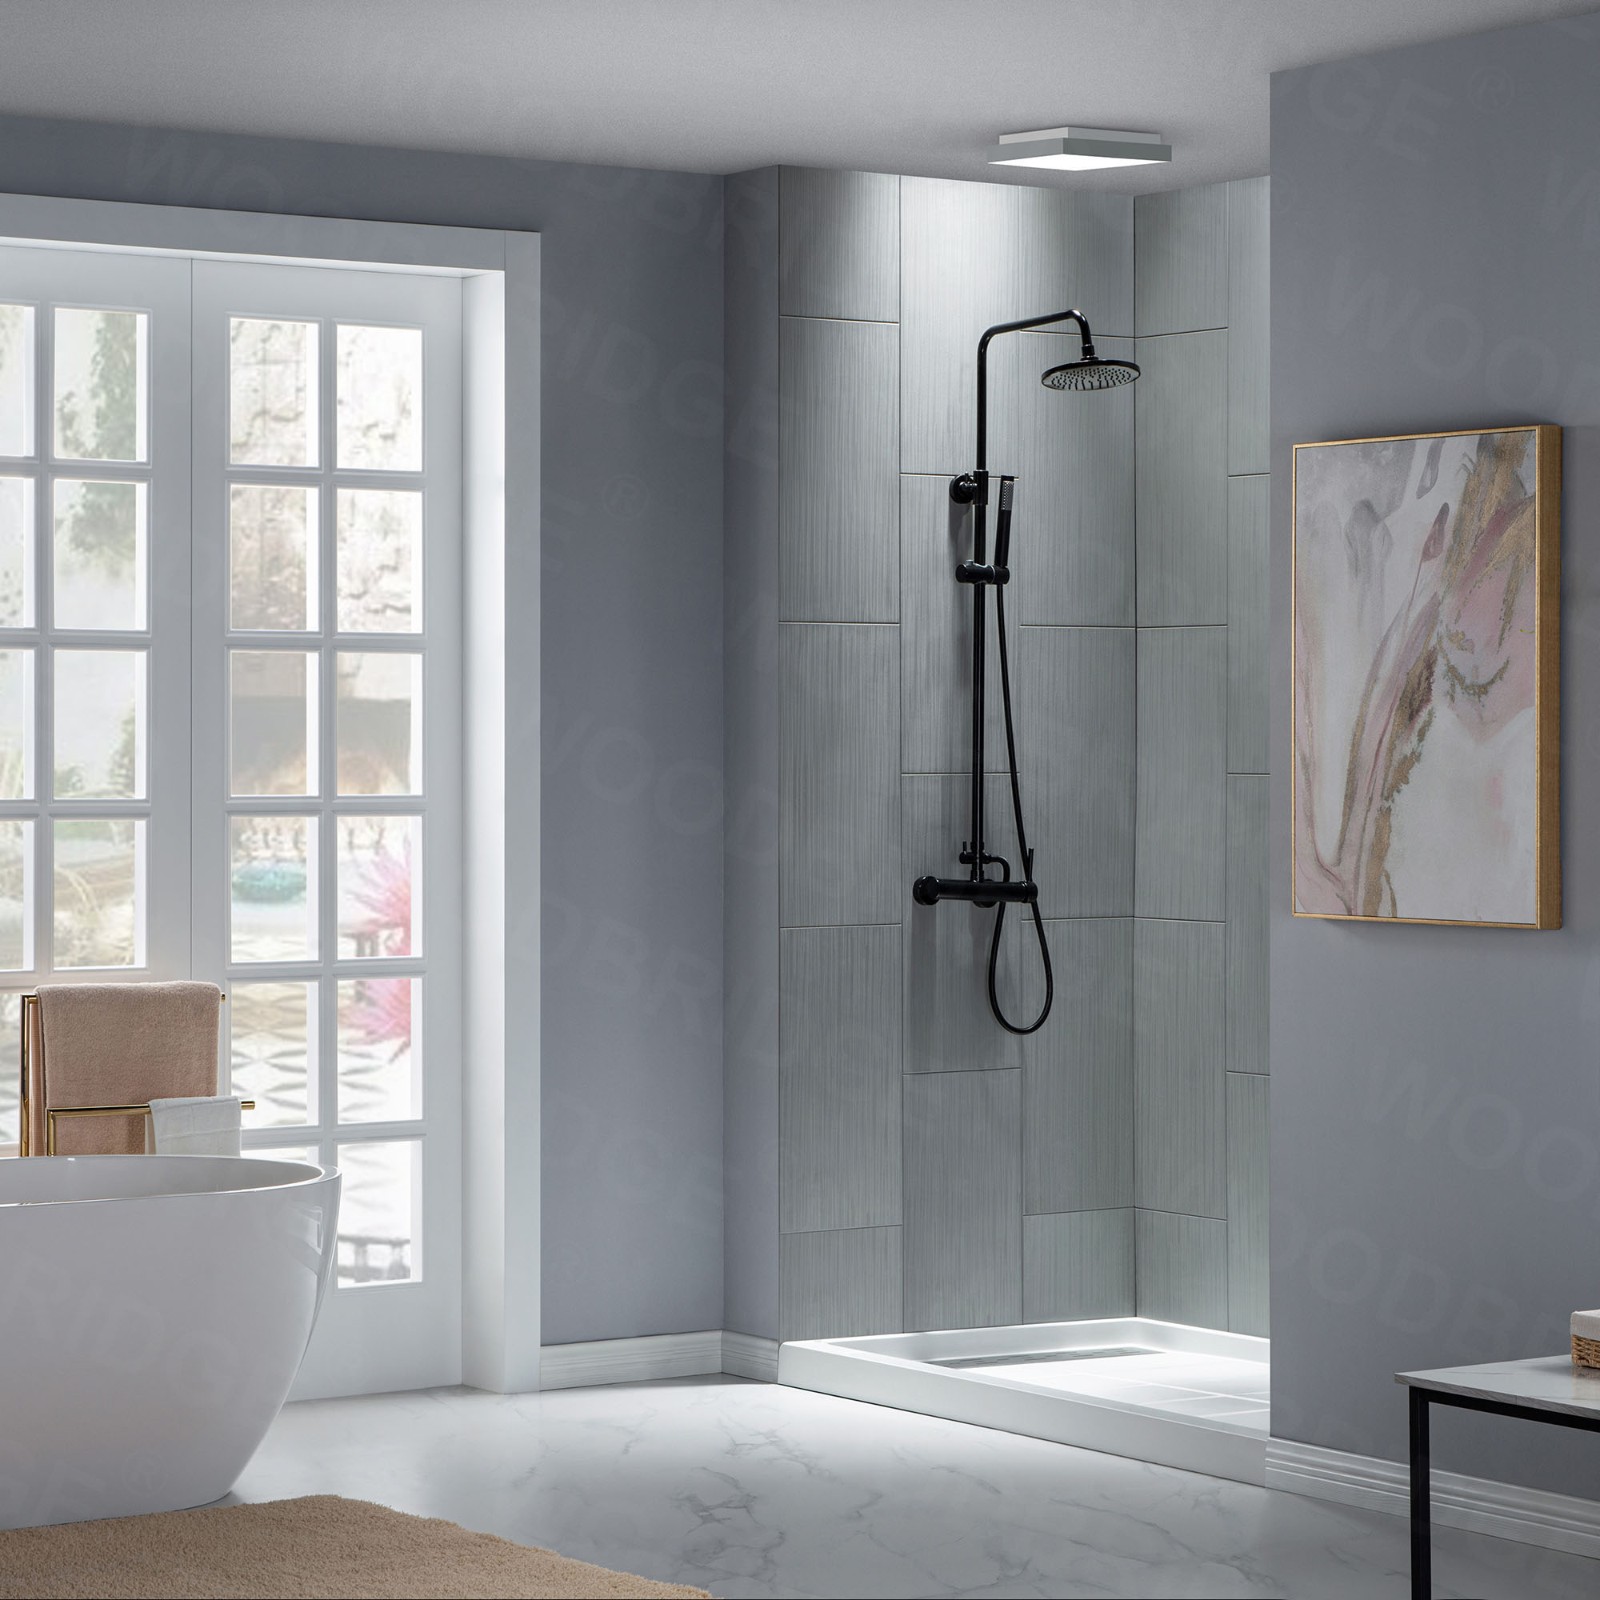  WOODBRIDGE  Solid Surface 3-Panel Shower Wall Kit, 32-in L x 60-in W x 96-in H, Stacked block in a staggered vertical pattern.  Matte Finish, Grey_5281